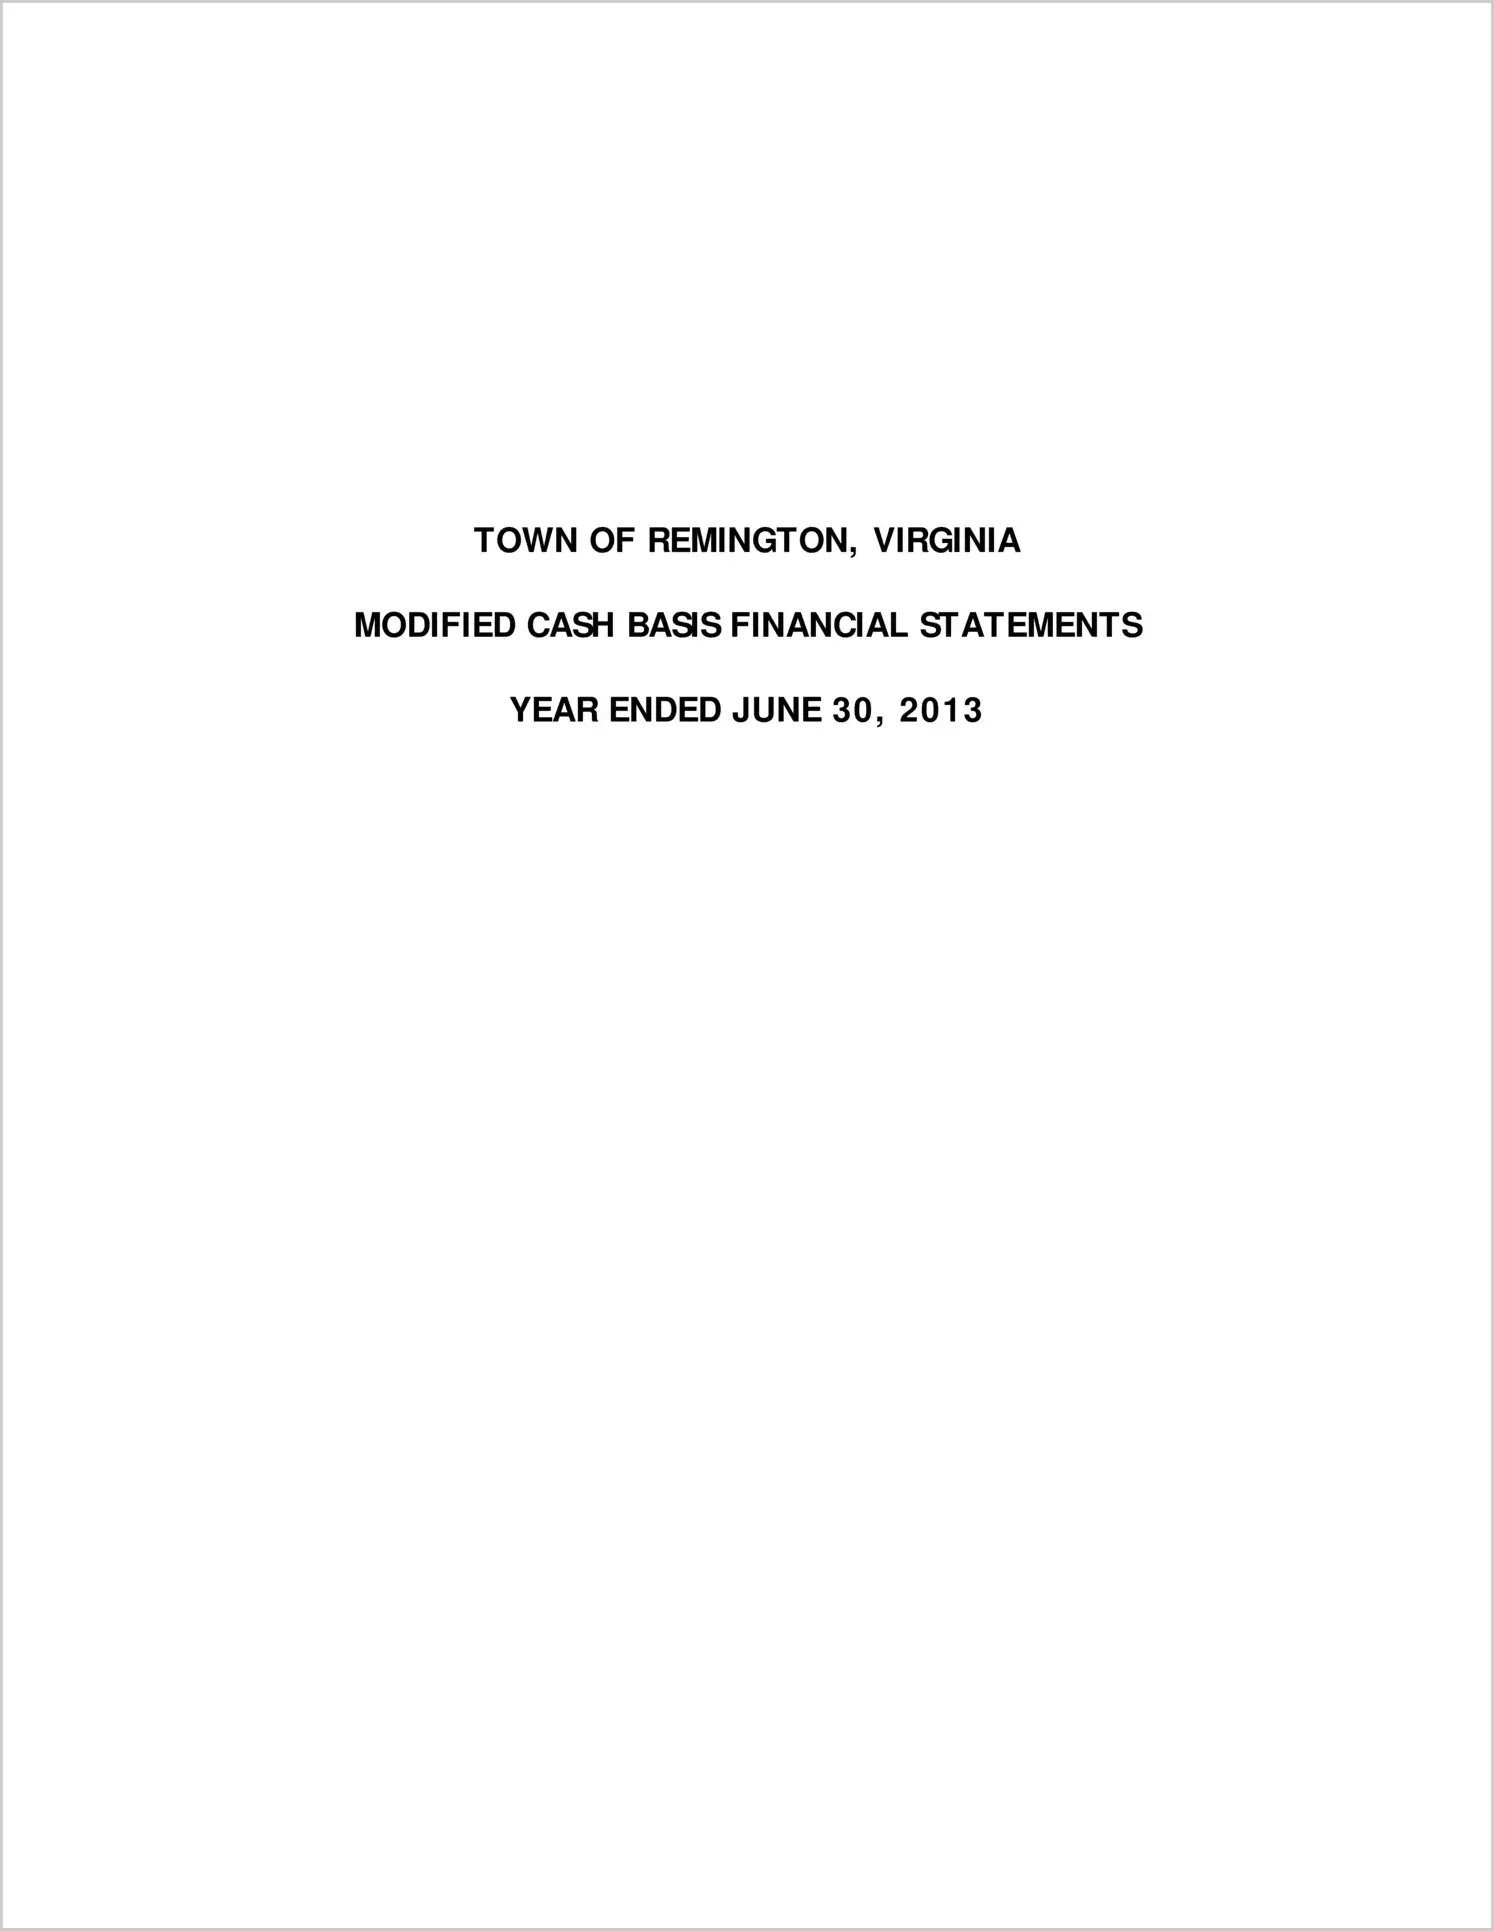 2013 Annual Financial Report for Town of Remington